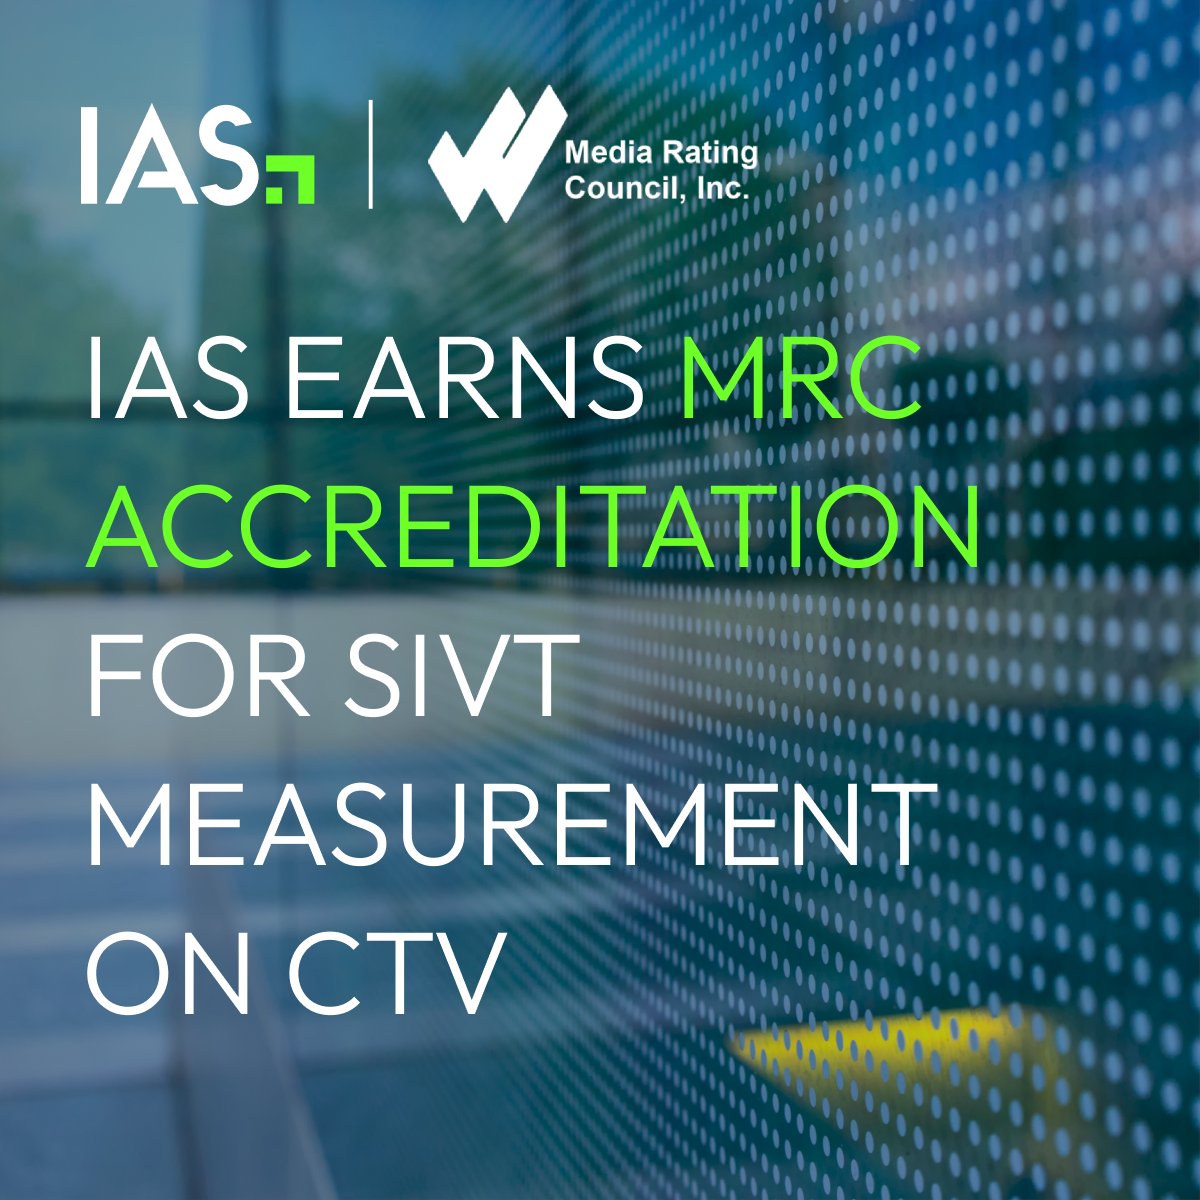 IAS has been accredited by the Media Rating Council (MRC) for sophisticated invalid traffic (SIVT) filtration on CTV, adding to our growing list of MRC-approved products for CTV. Read more: integralads.com/news/ias-earns…